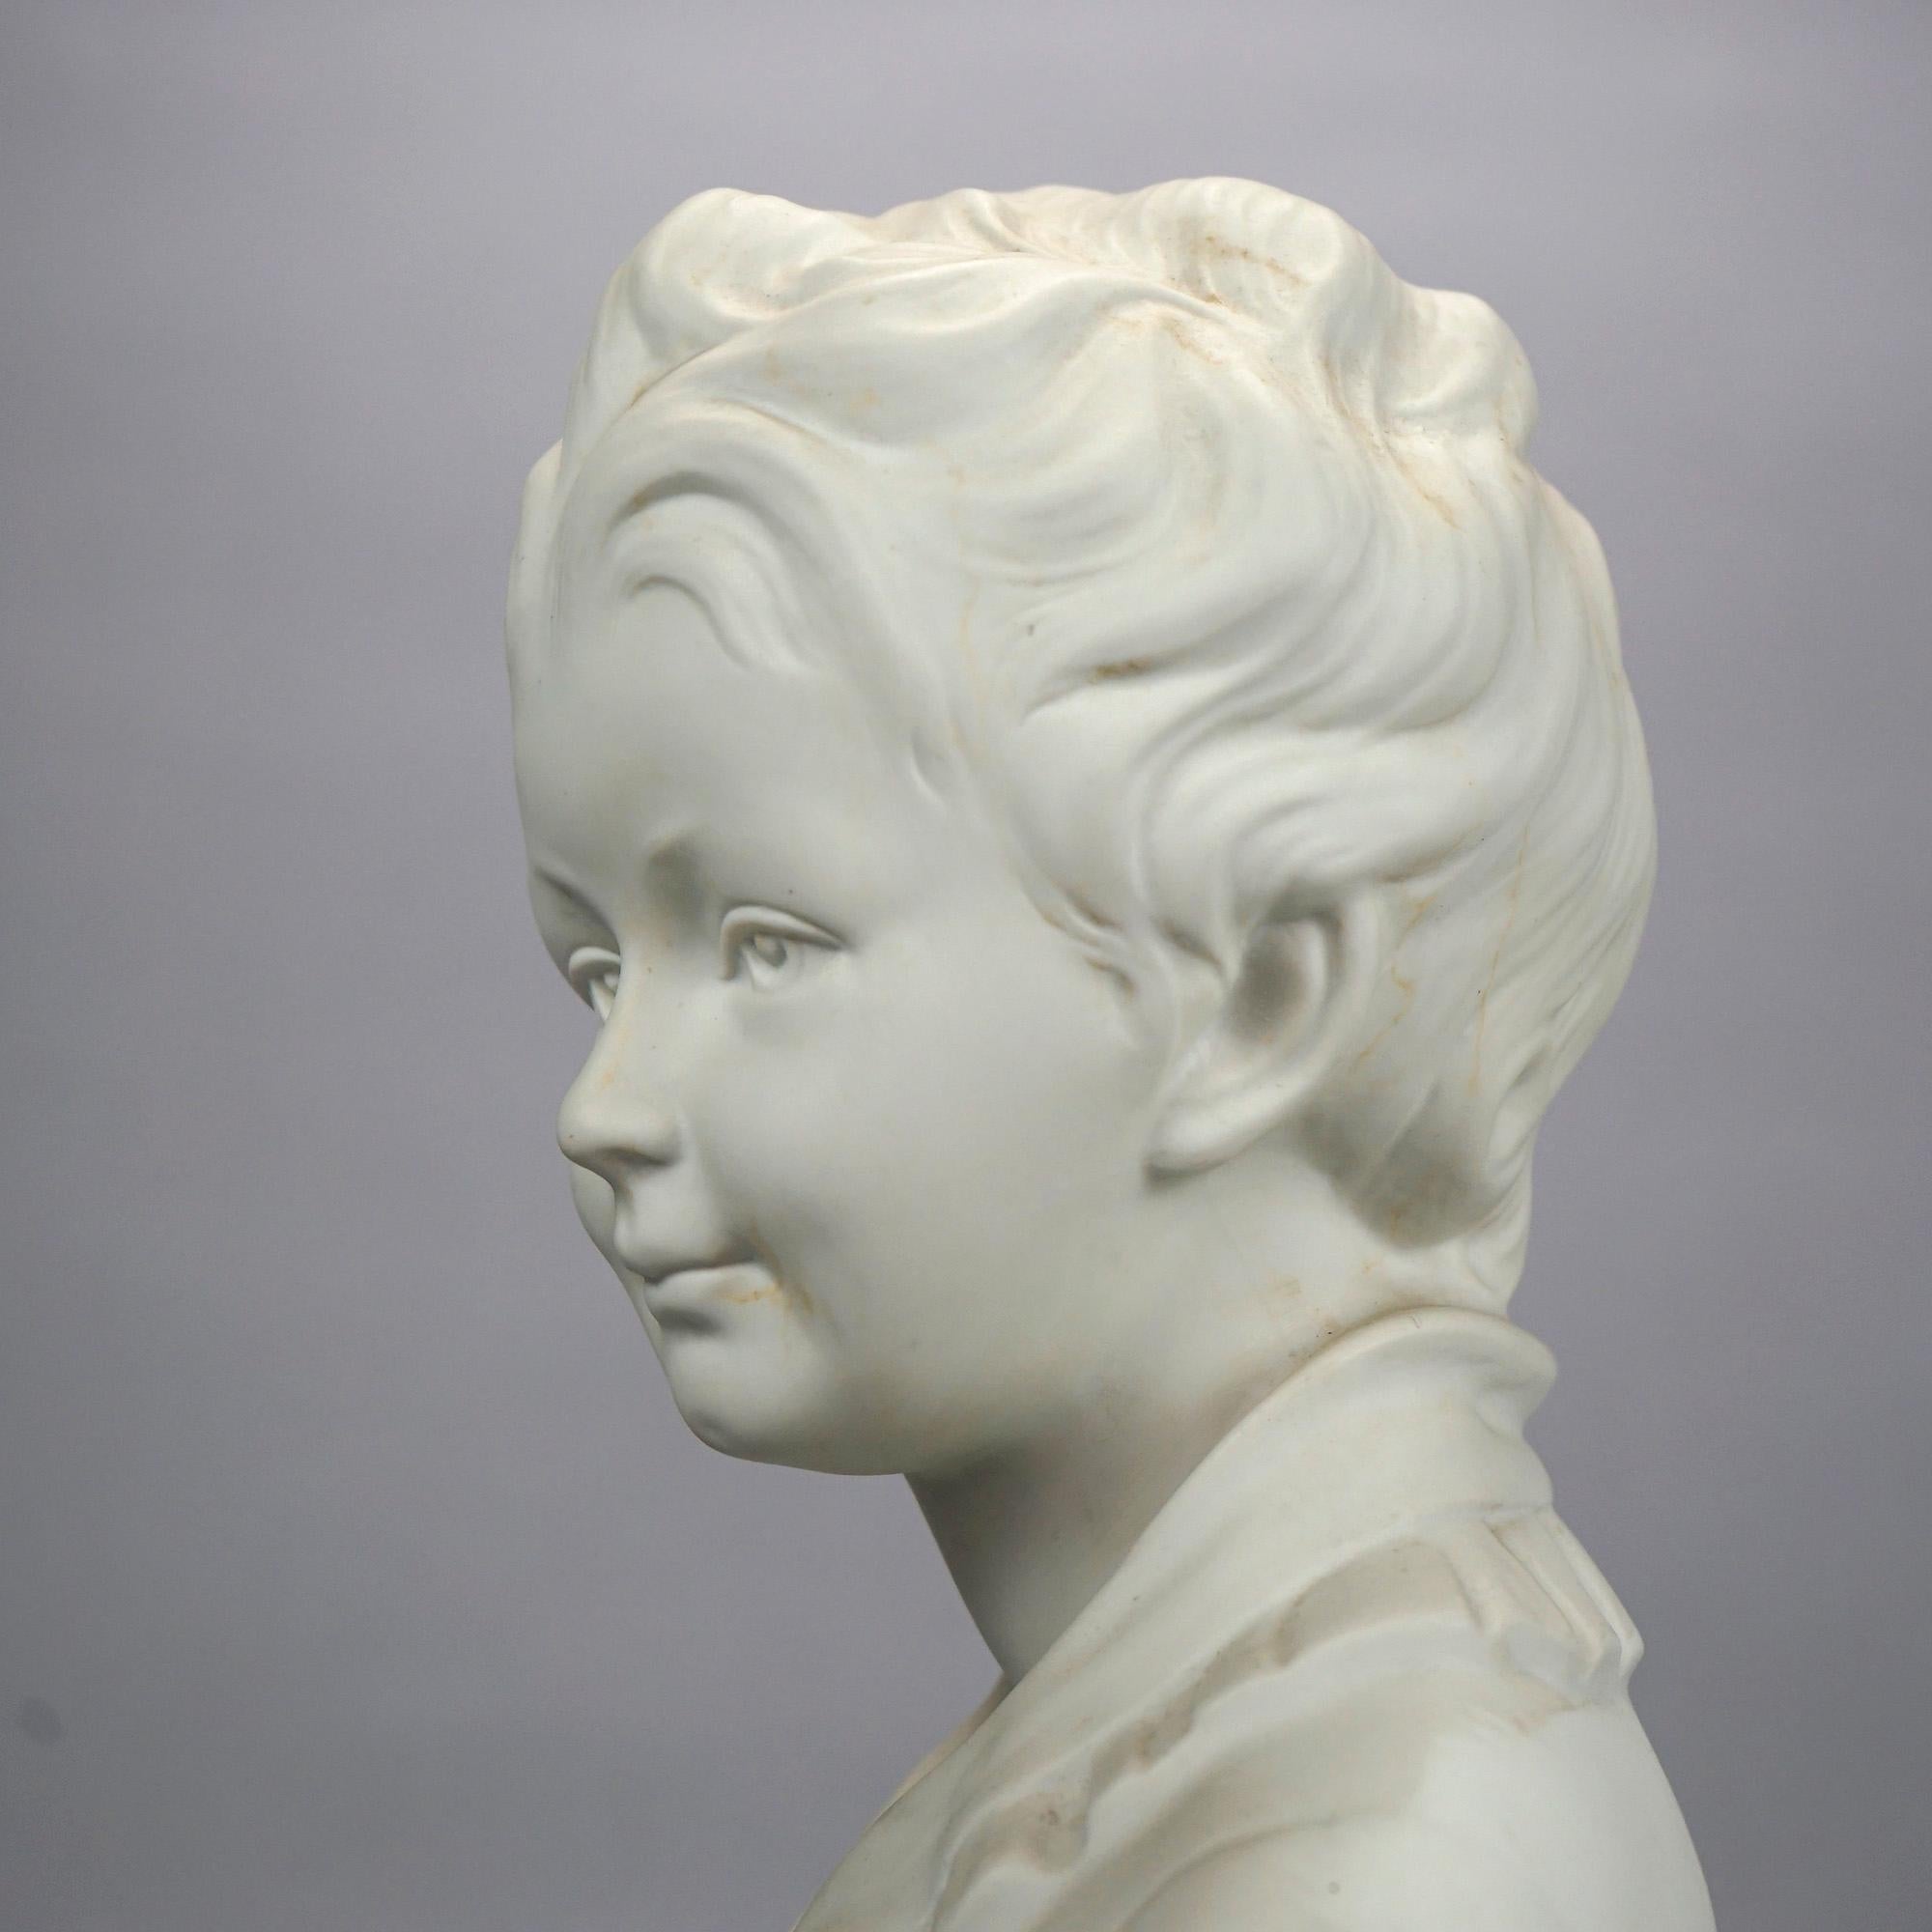 Pair French Limoges Parian Porcelain Bust Sculptures of Young Boy & Girl, 20th C For Sale 4